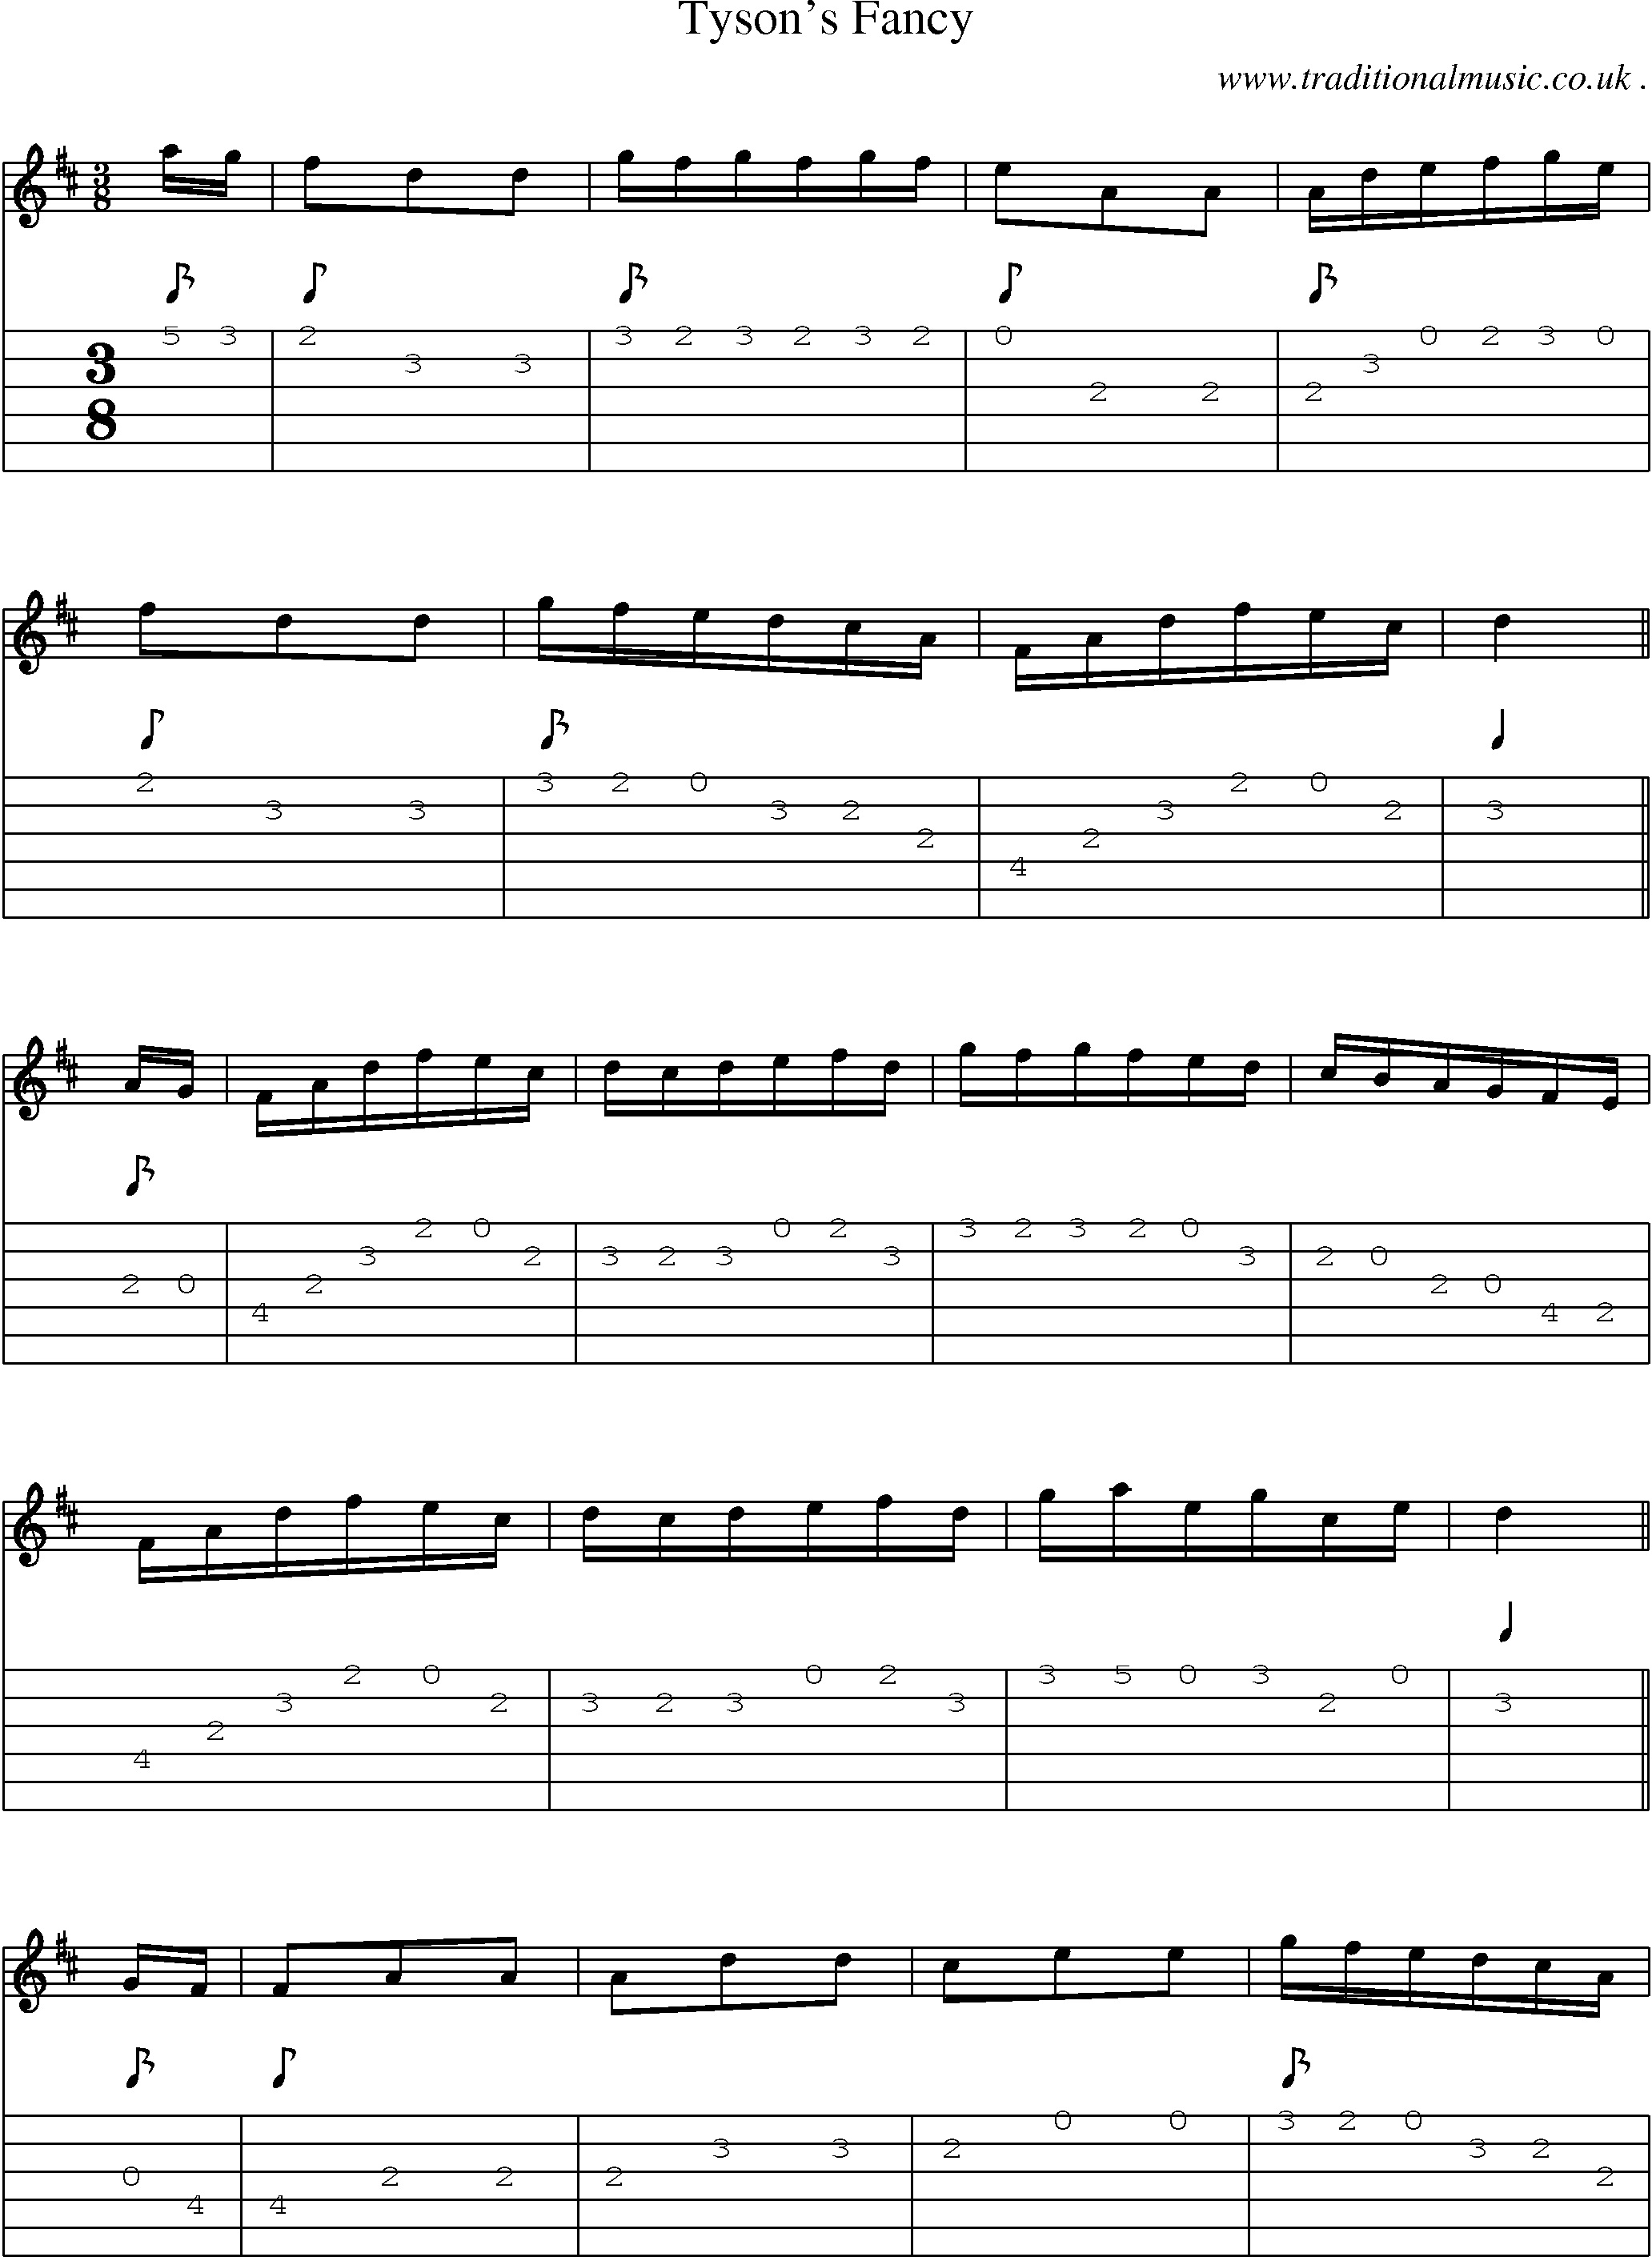 Sheet-Music and Guitar Tabs for Tysons Fancy